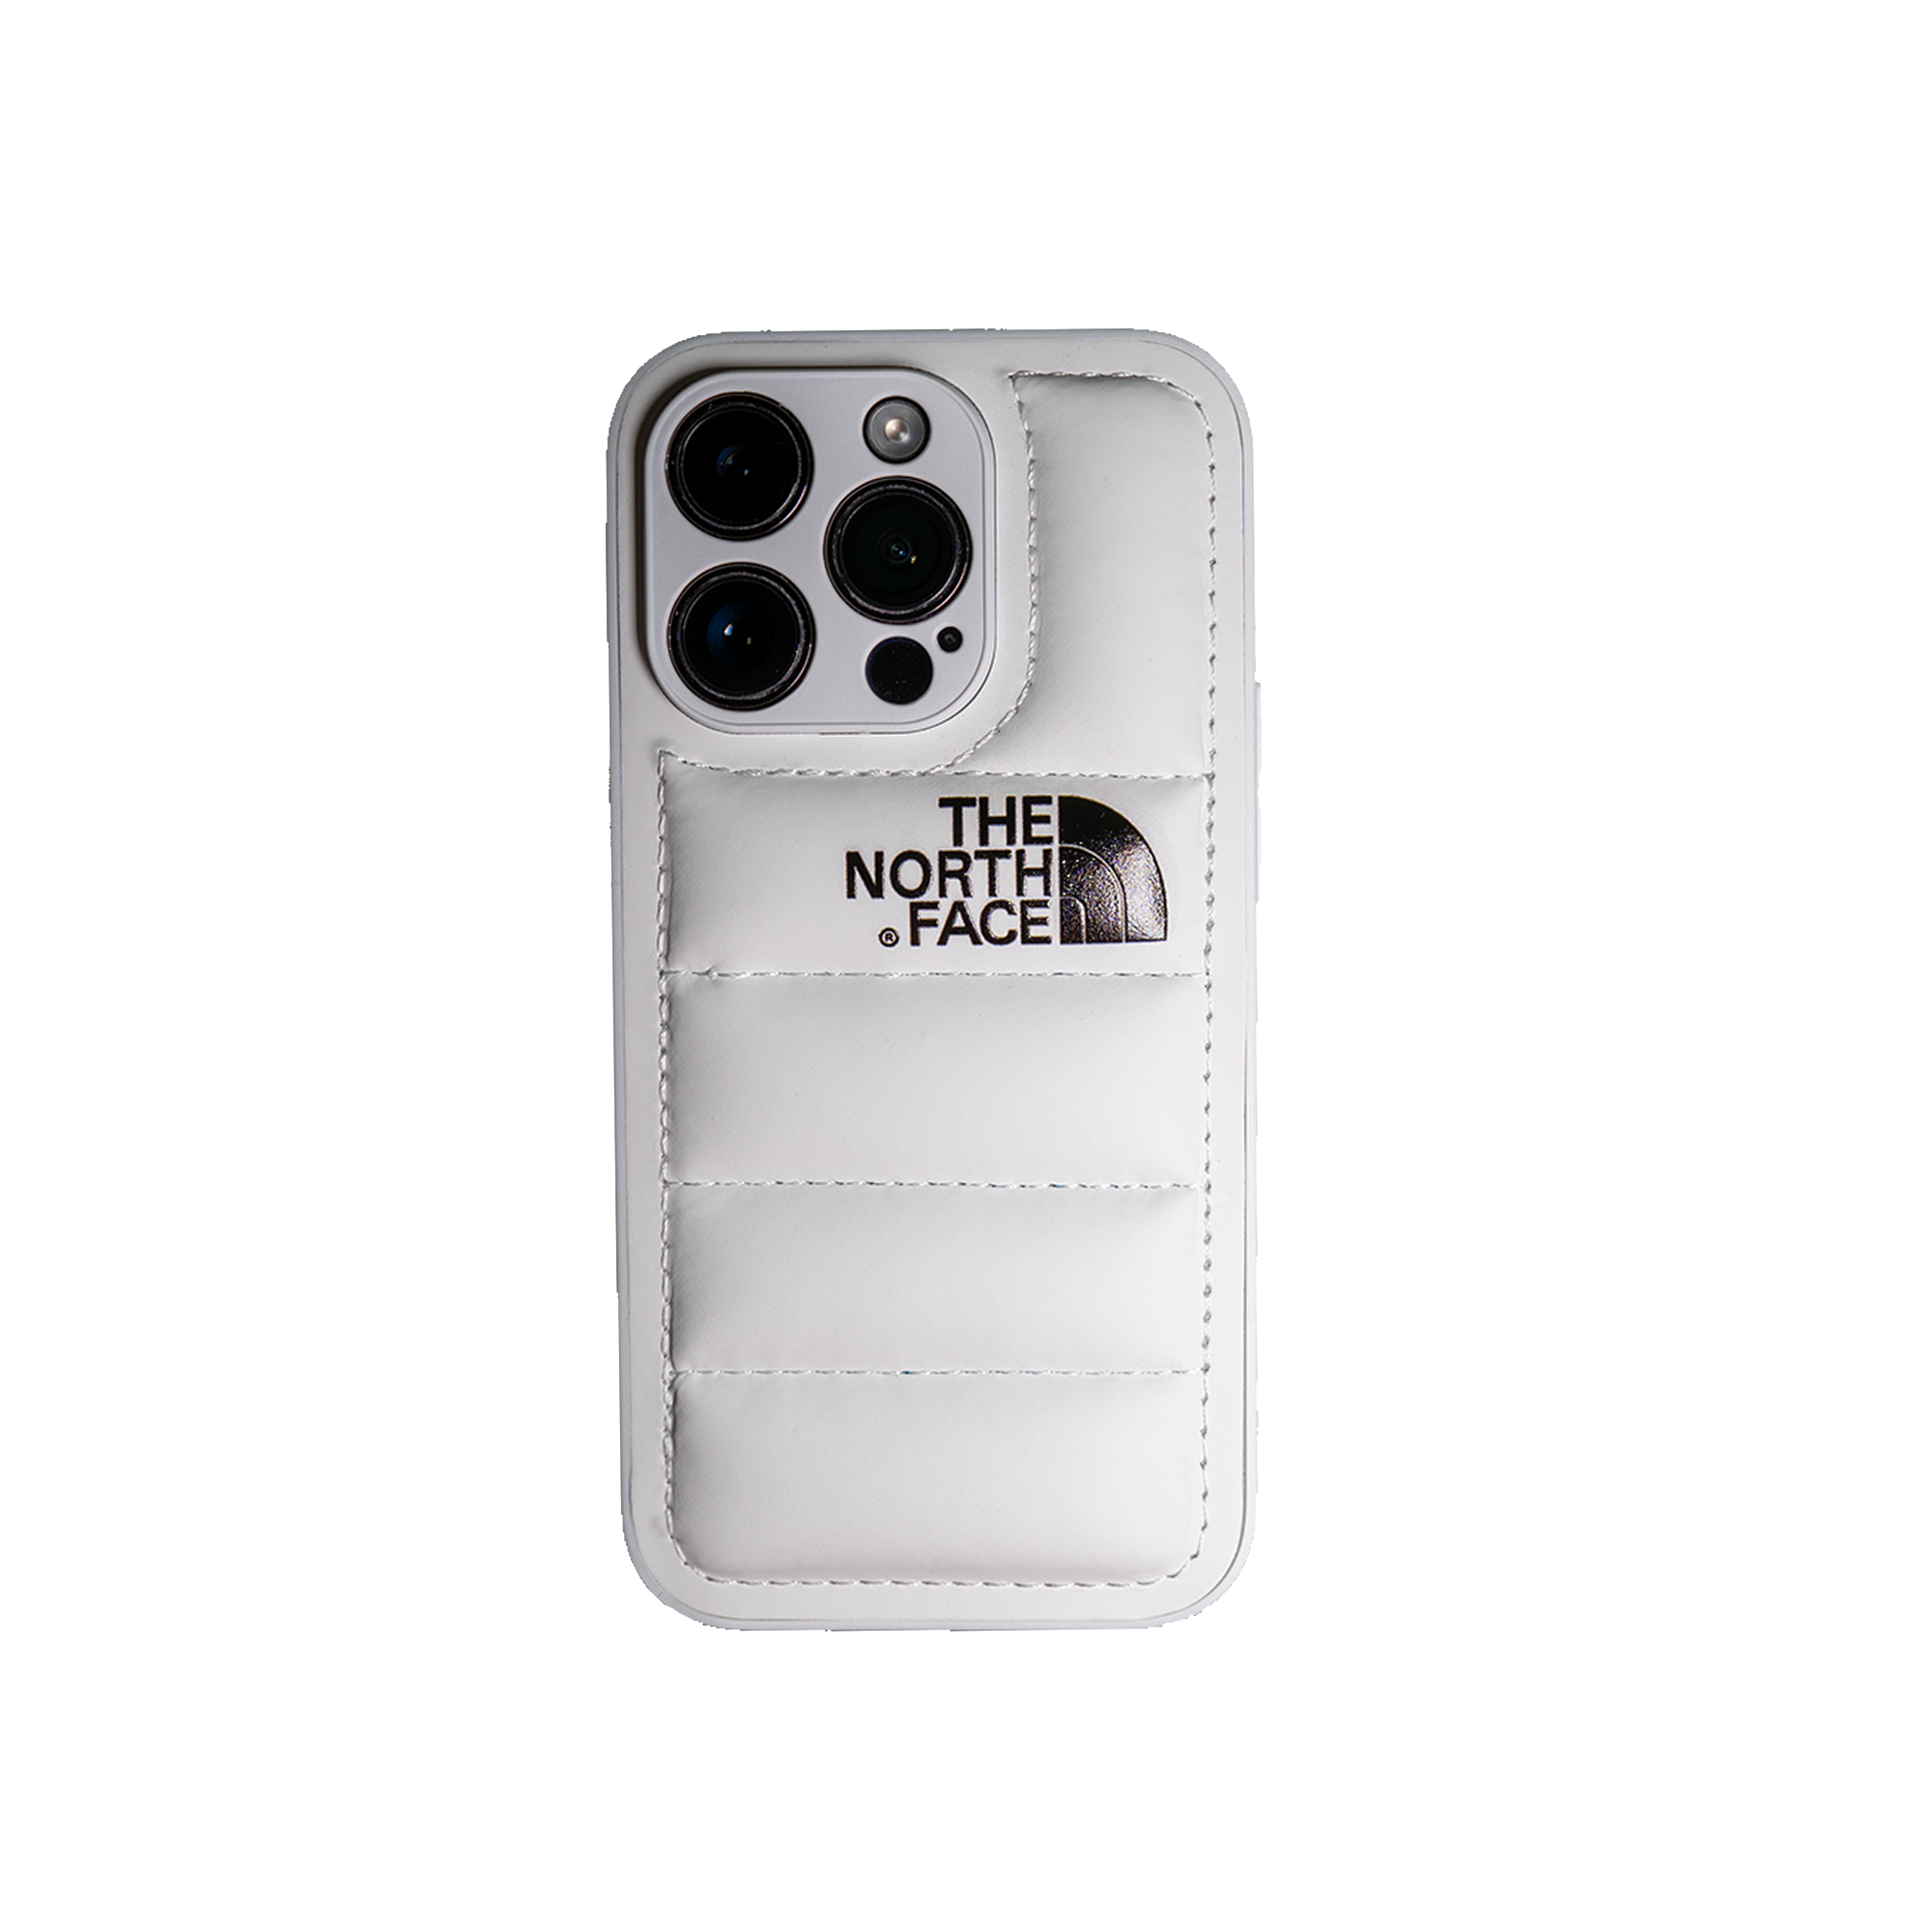 Sleek white The North Face smartphone case with a minimalistic design